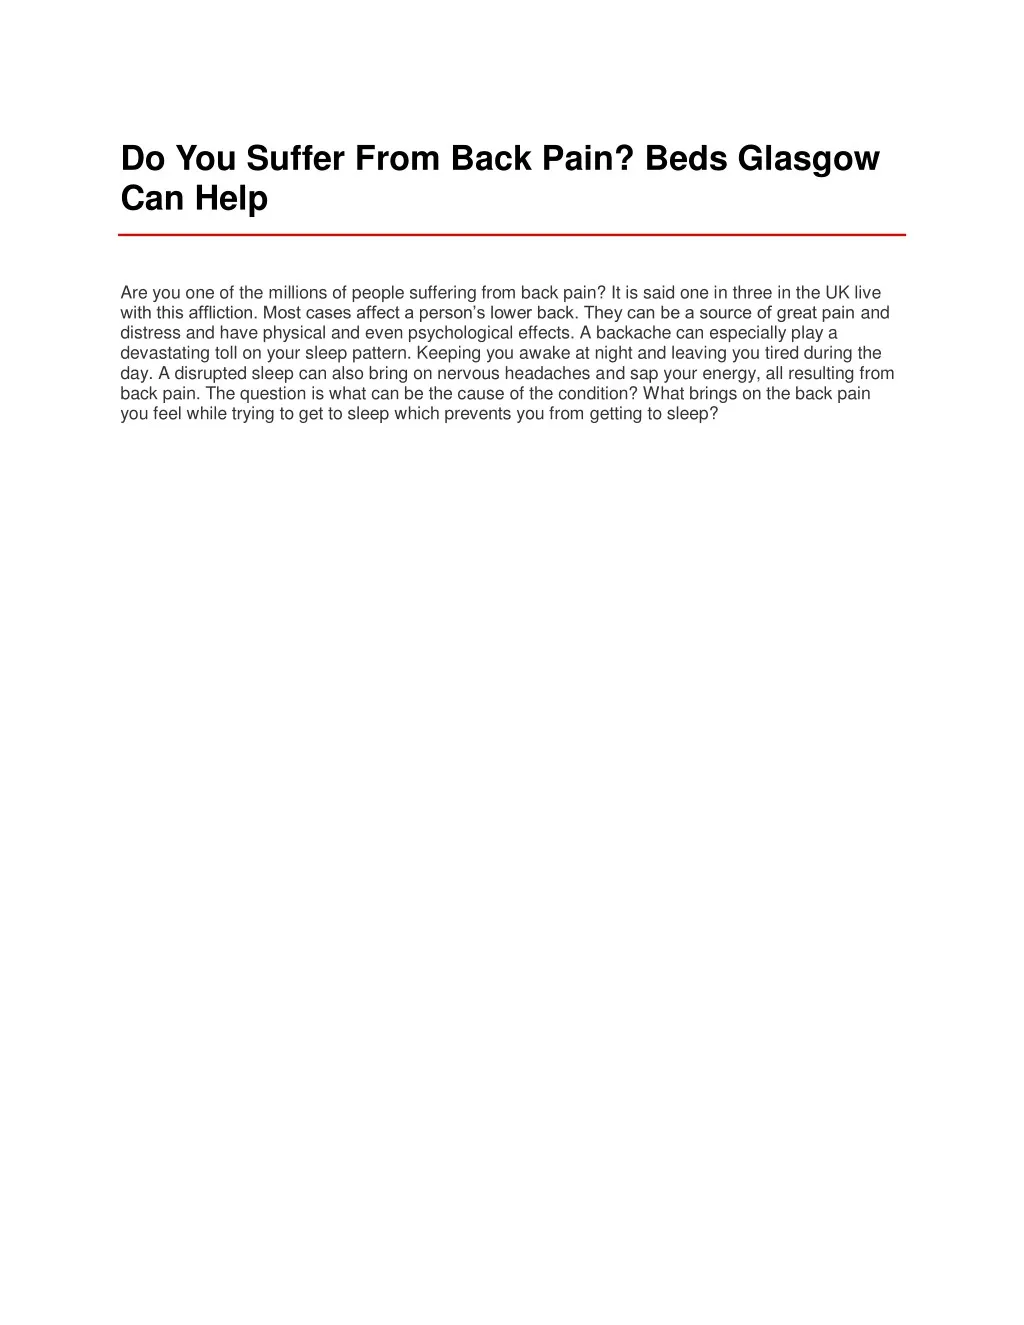 do you suffer from back pain beds glasgow can help